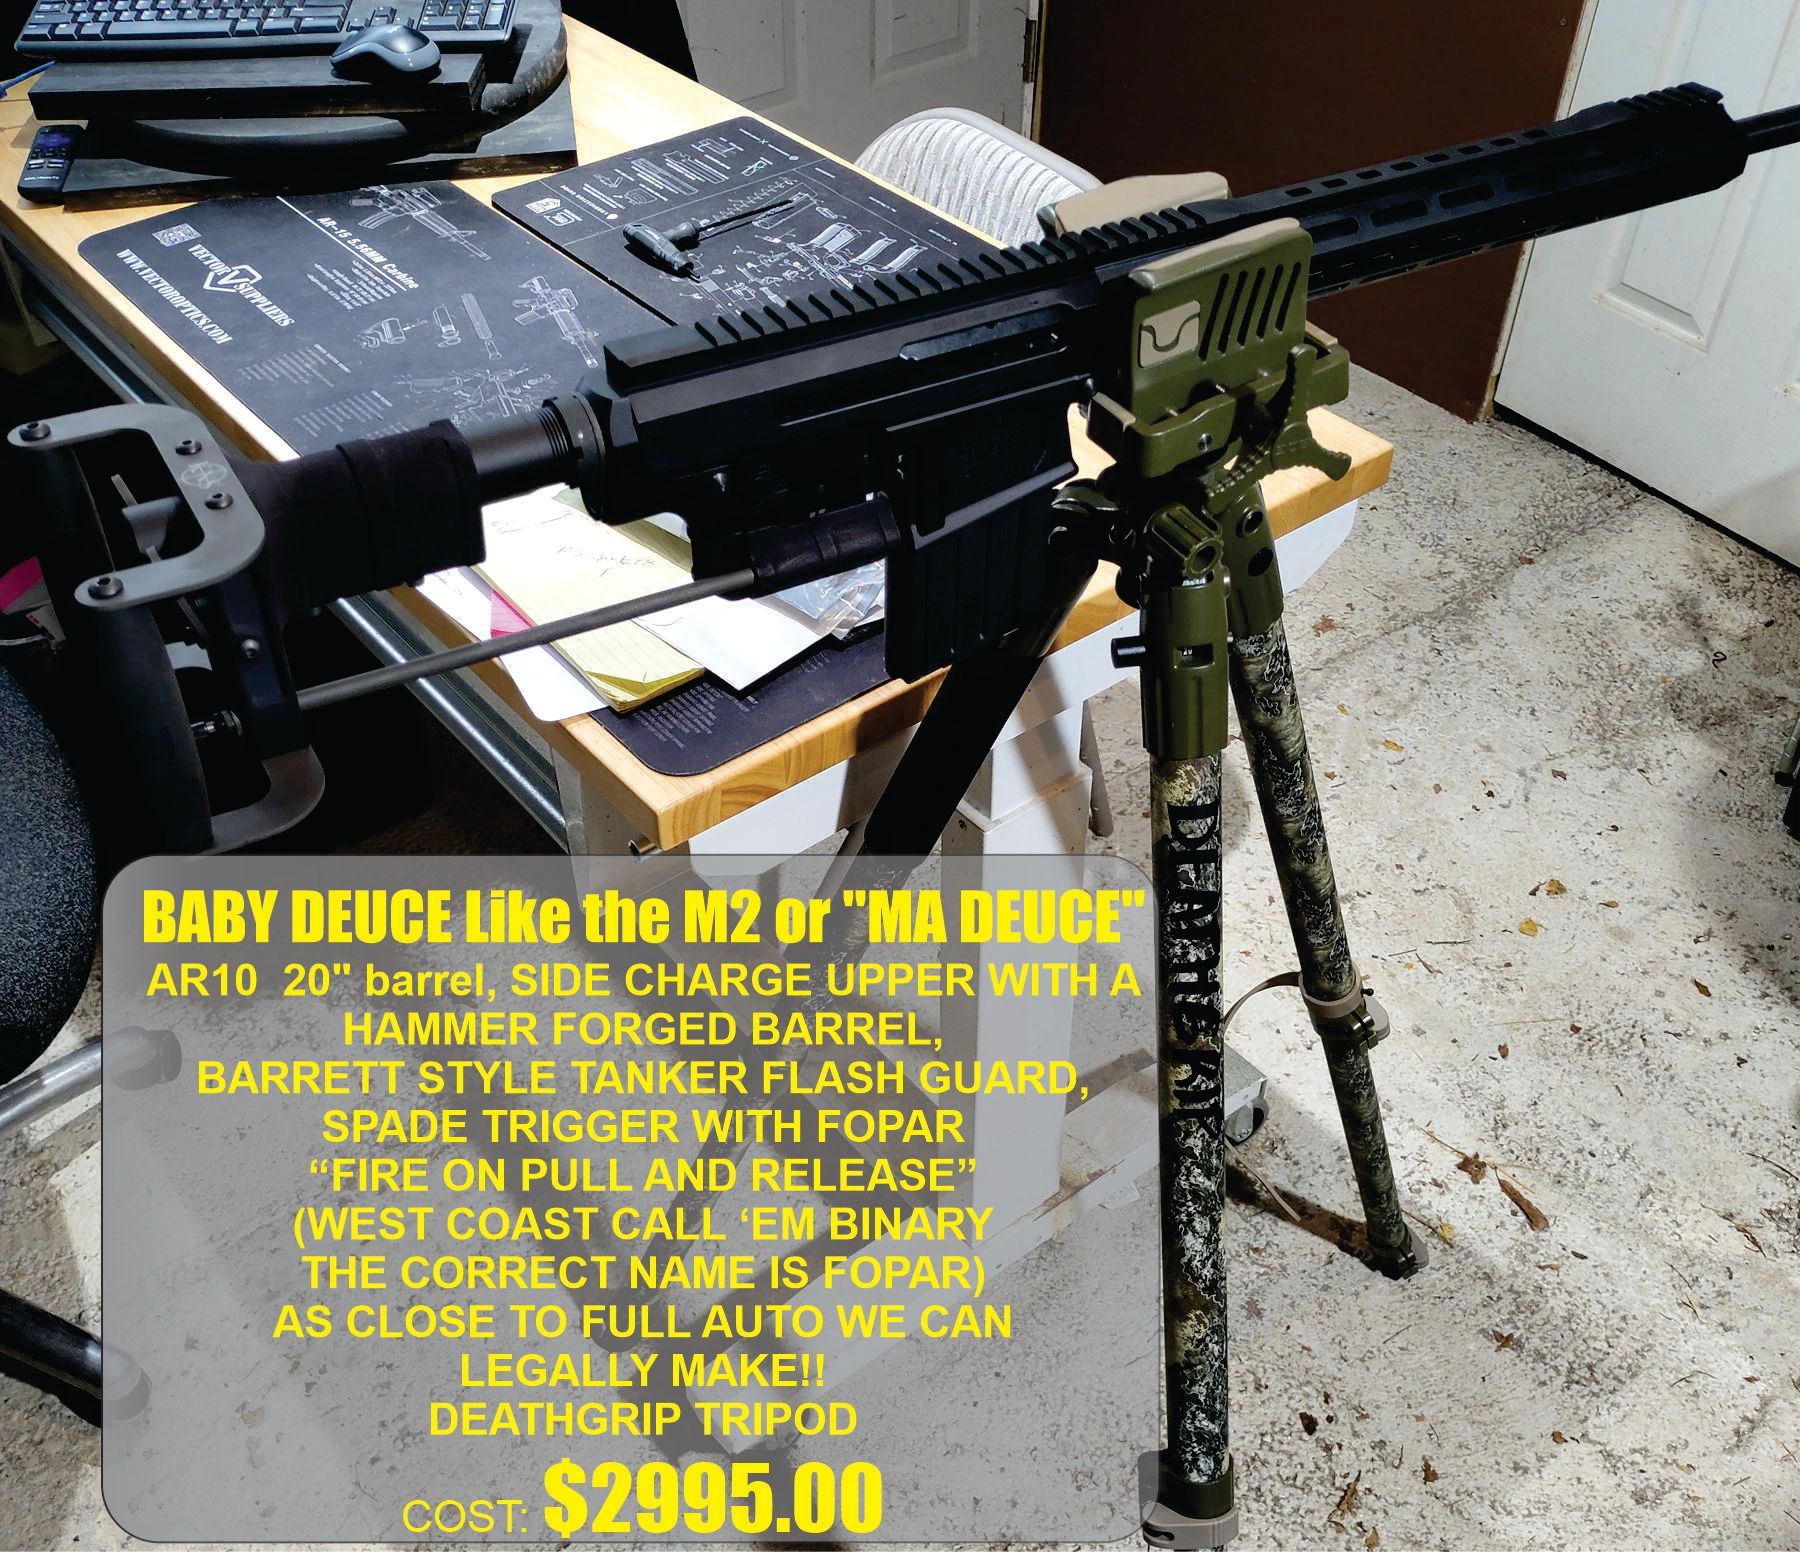 Totally cool and easily convertible back to a standard AR-10!